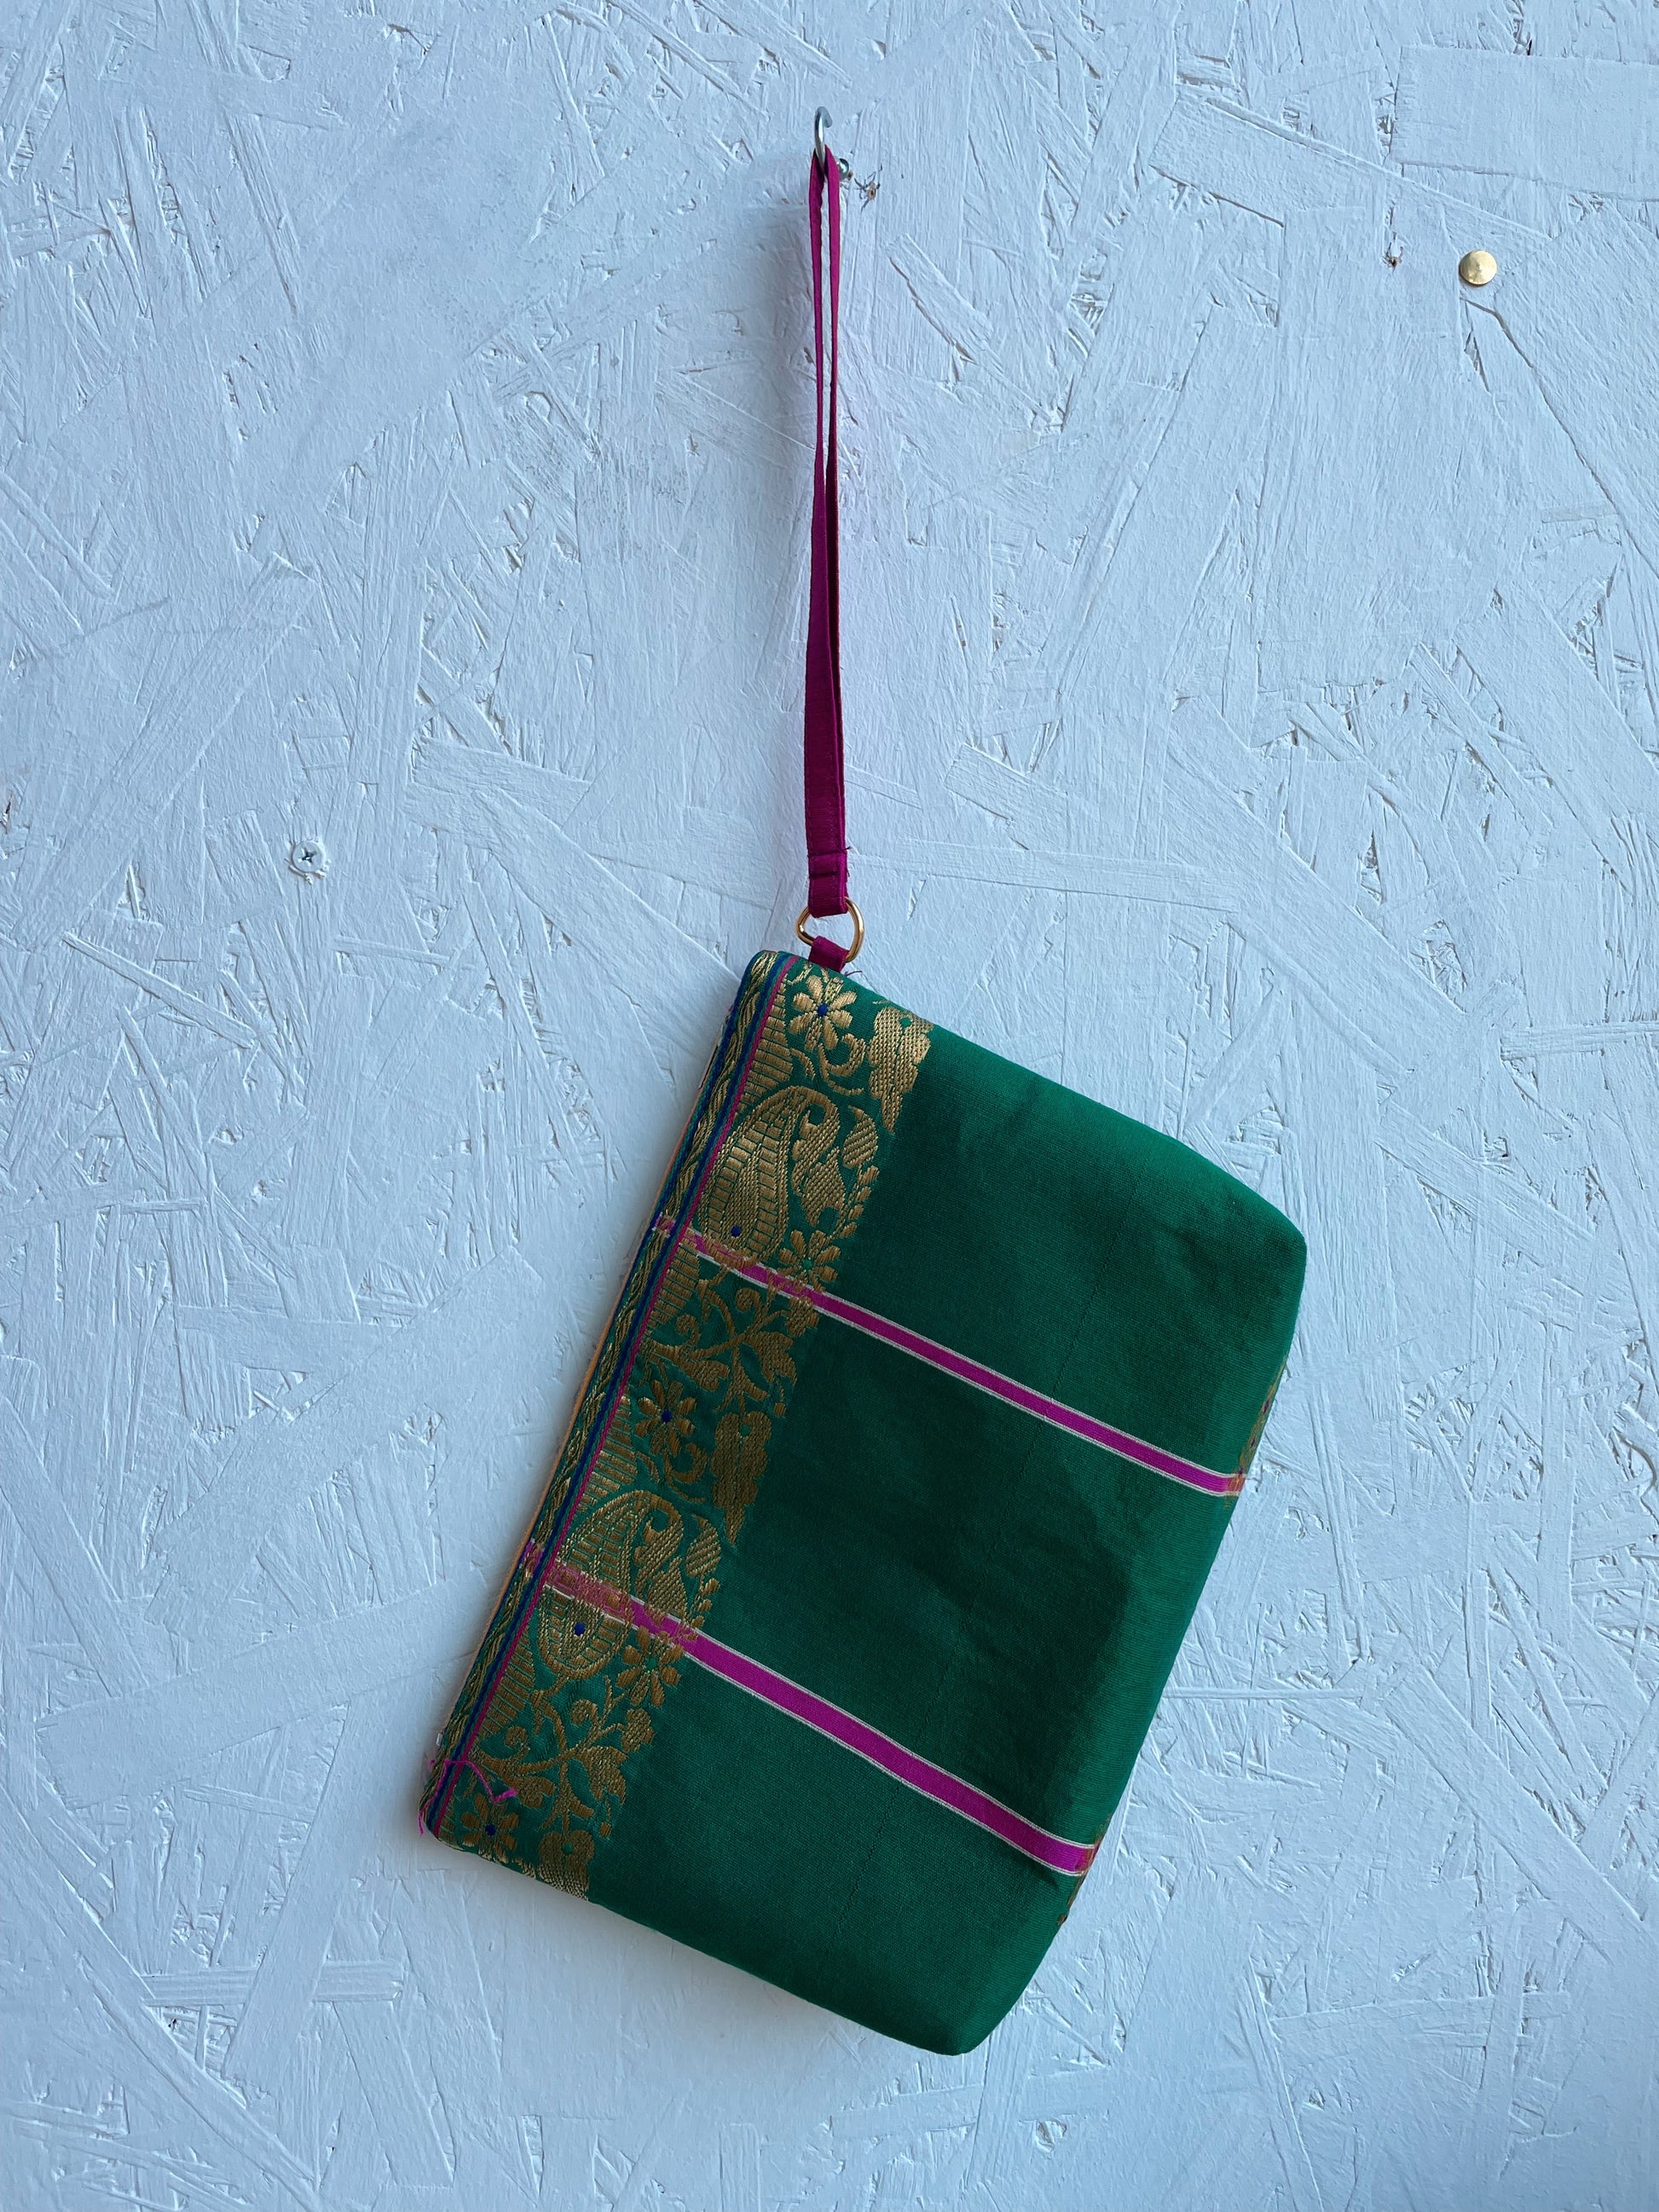 Pink and Green Clutch Bag - House of Bilimoria